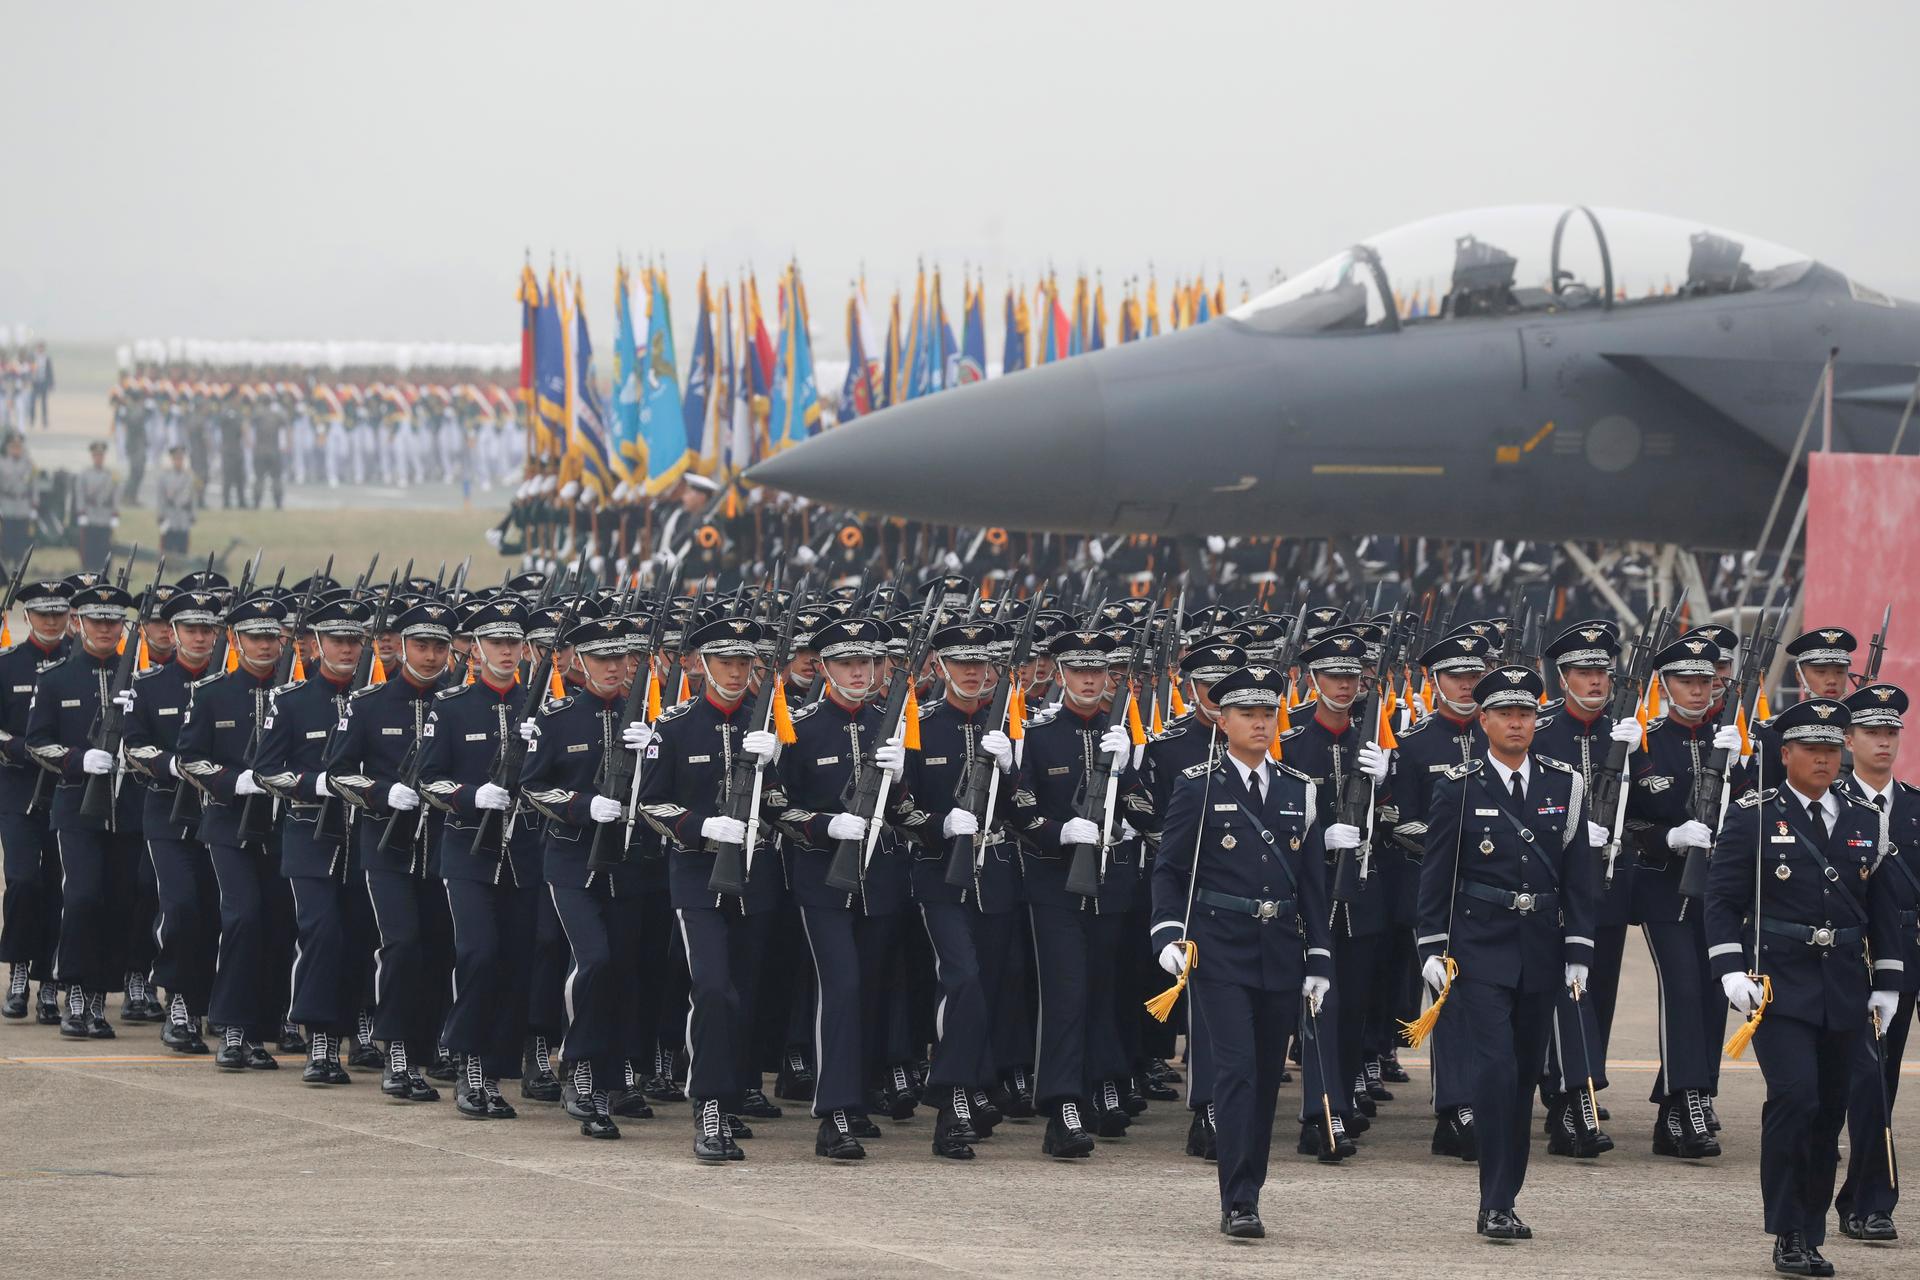 South Korean Army soldiers in black uniforms participate in a ceremony to mark the 71st anniversary of Armed Forces Day near military plane